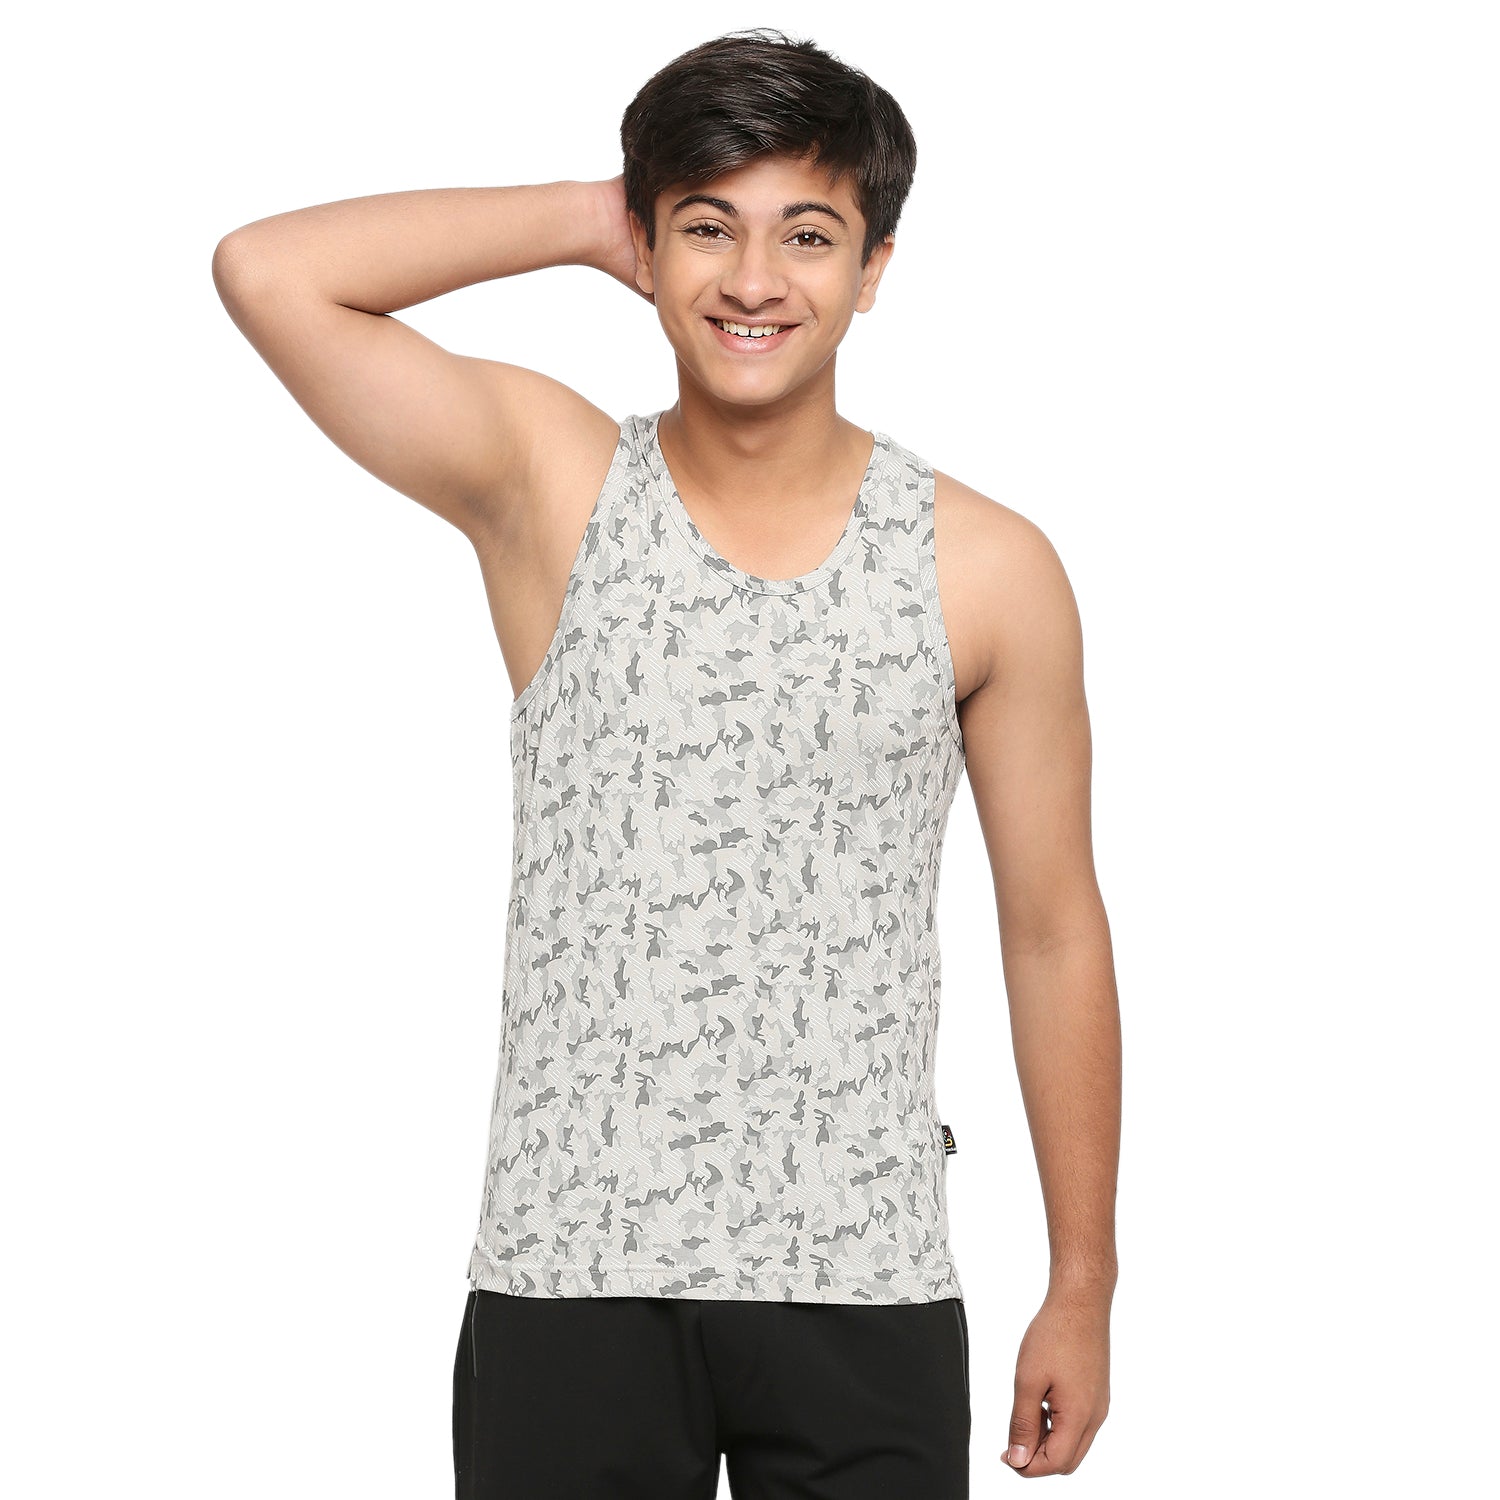 Frenchie U-19 Teens Light Gray Vest in Camouflage Print